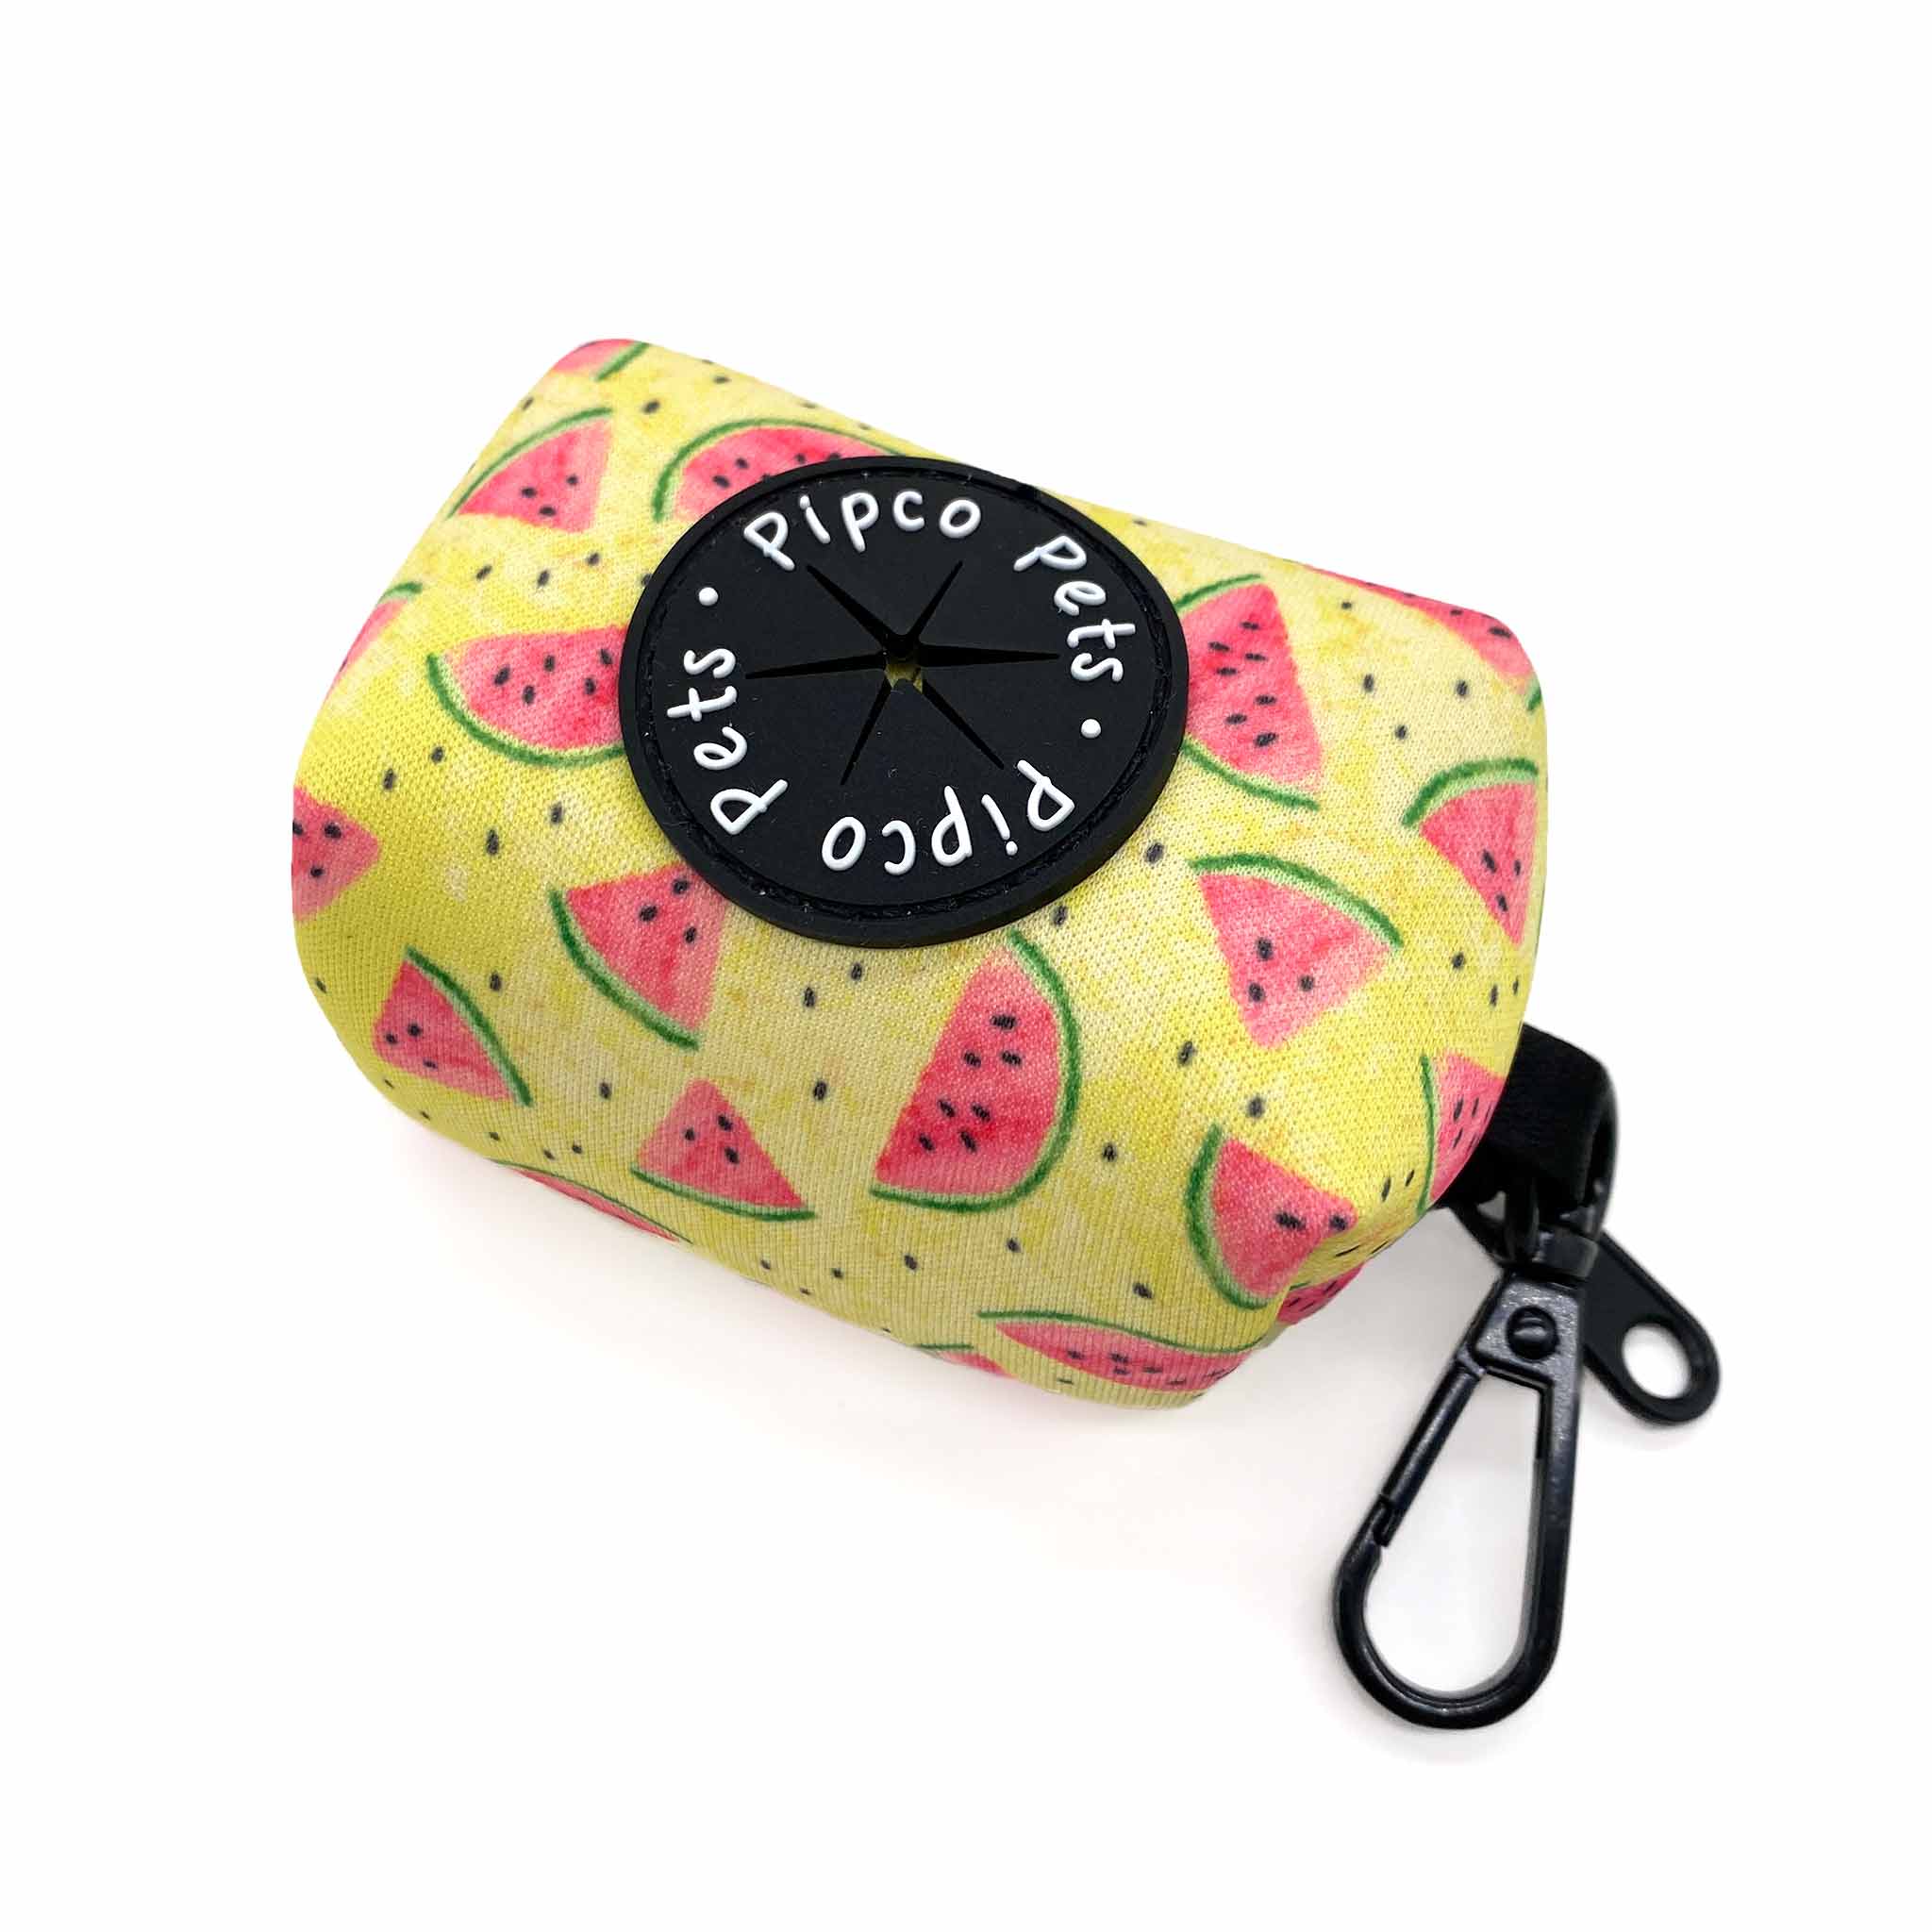 Pipco Pets dog poo bag dispenser with Summer Melons watermelon print pattern in yellow